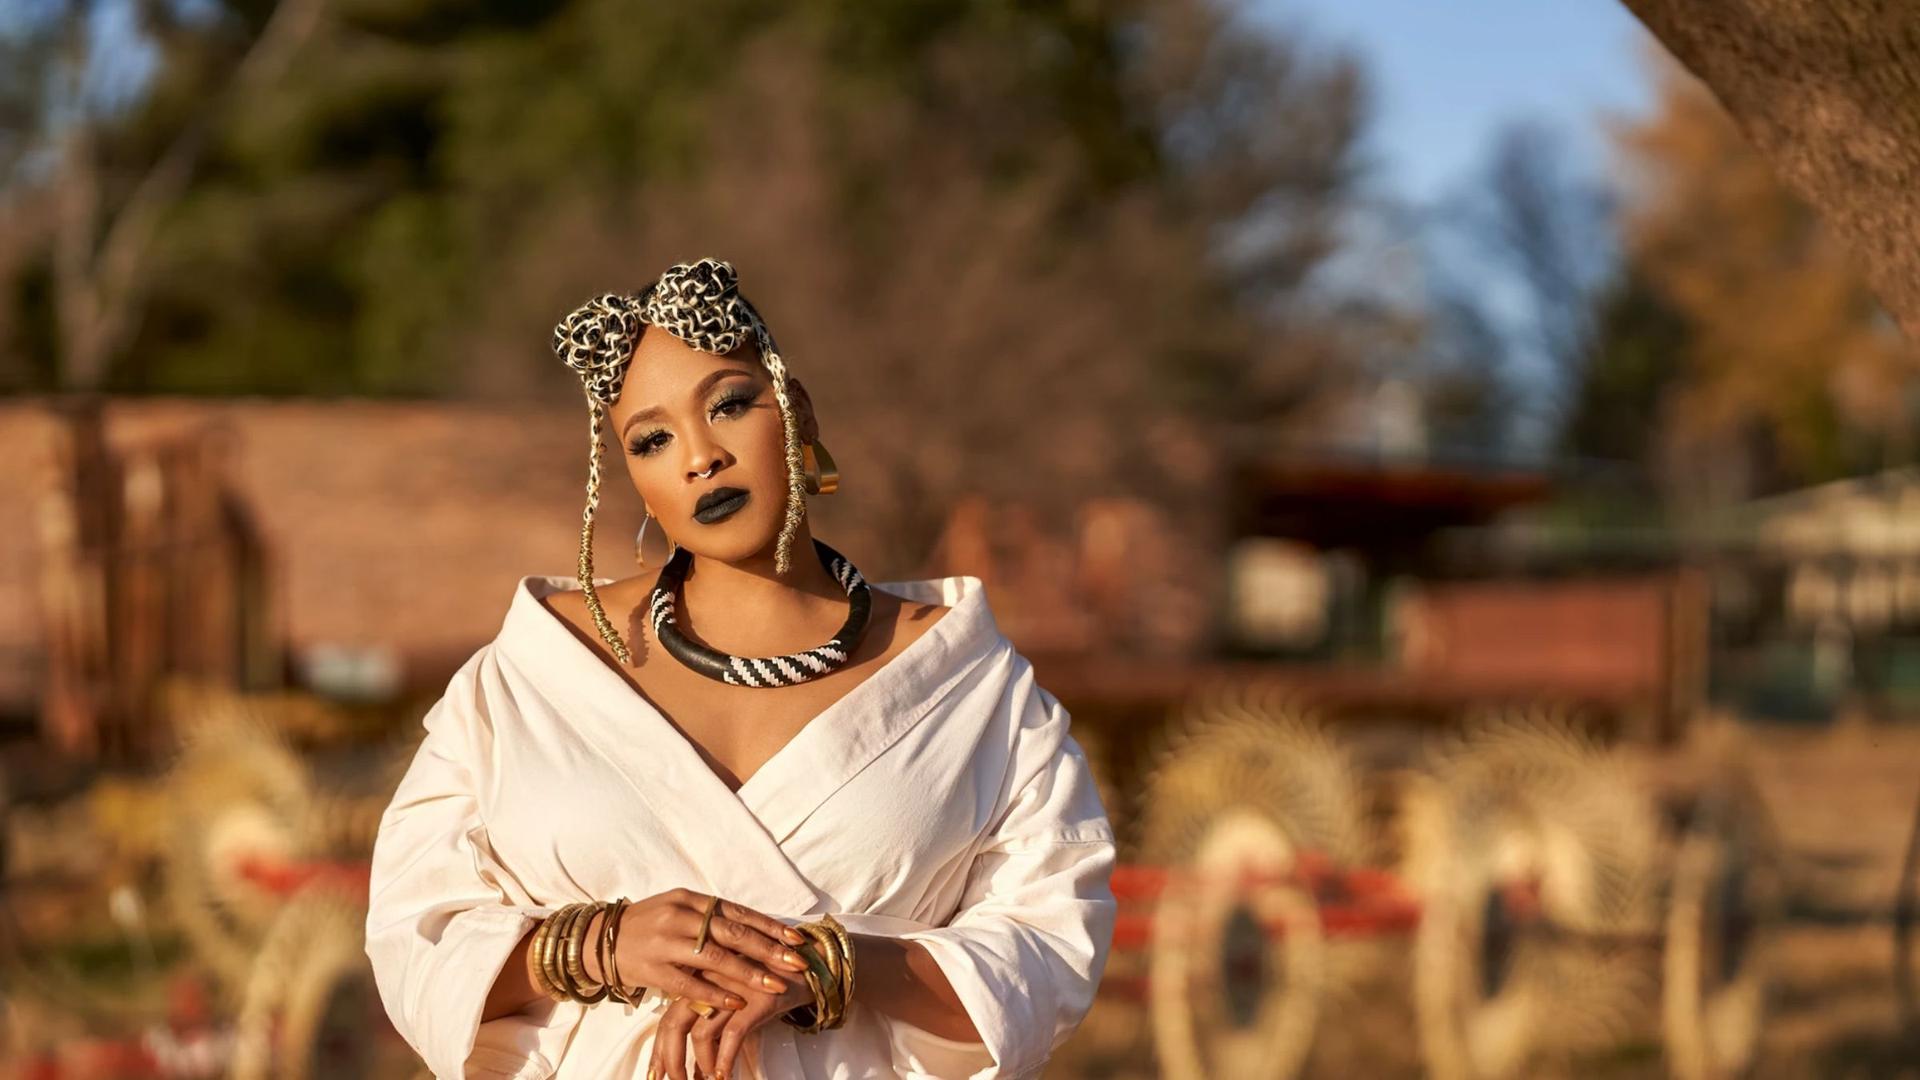 Pilani Bubu found her music community after she moved from South Africa to New Orleans. She understood that the people she met wanted to learn more about her culture back home. That’s when she started to incorporate South African music into her repertoire